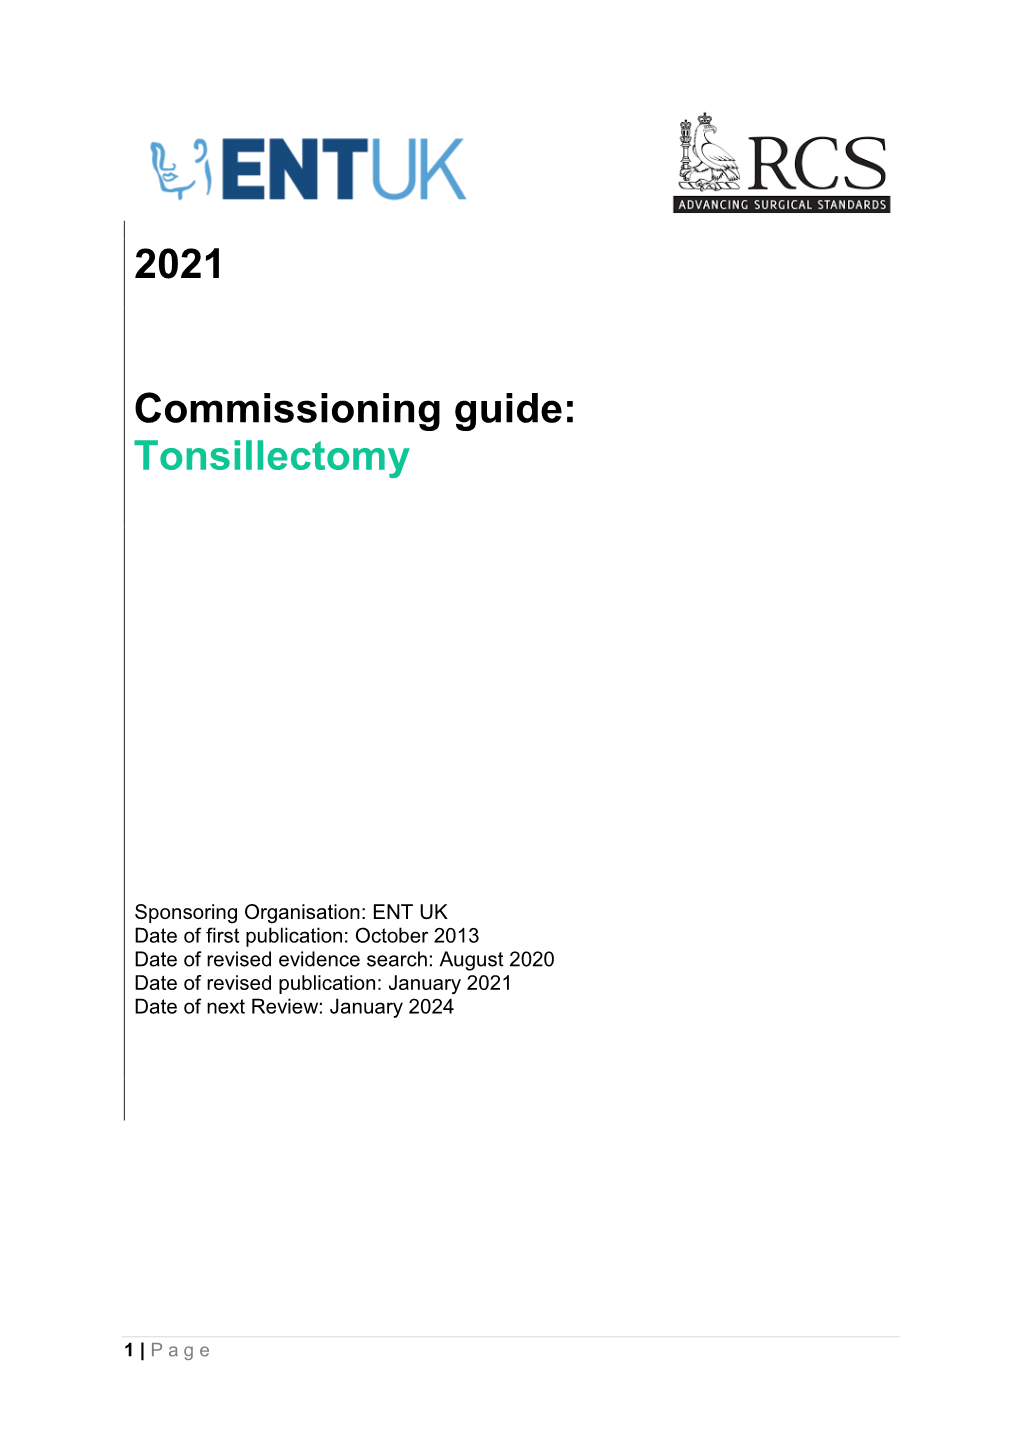 ENT UK Tonsillectomy Commissioning Guide